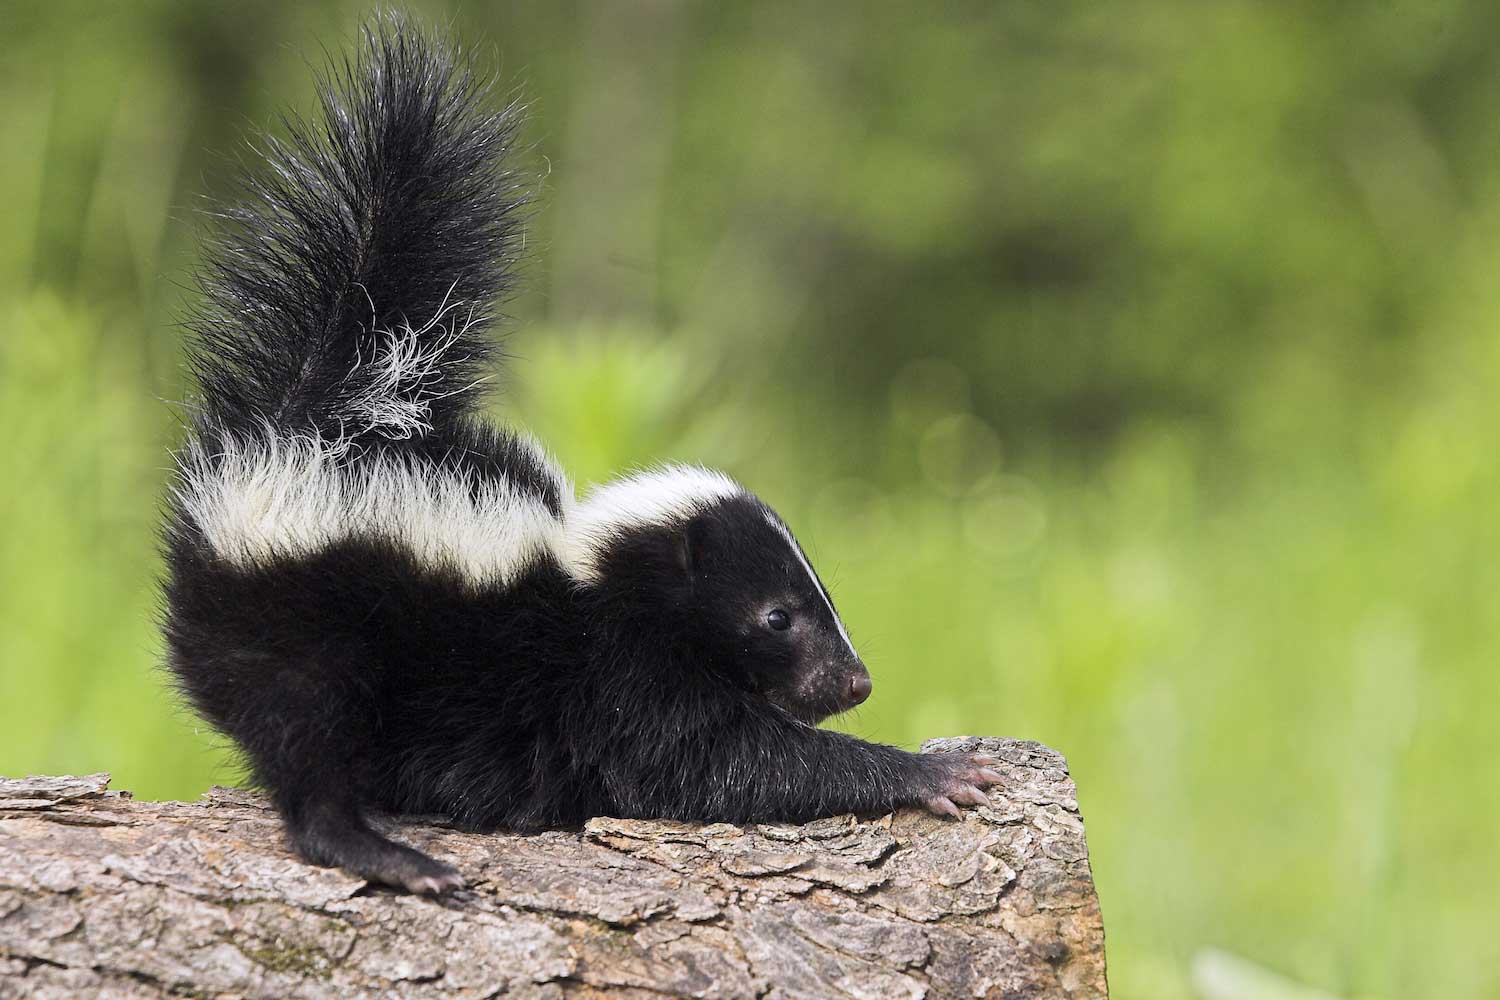 A young skunk on a log with its tail extended upward.